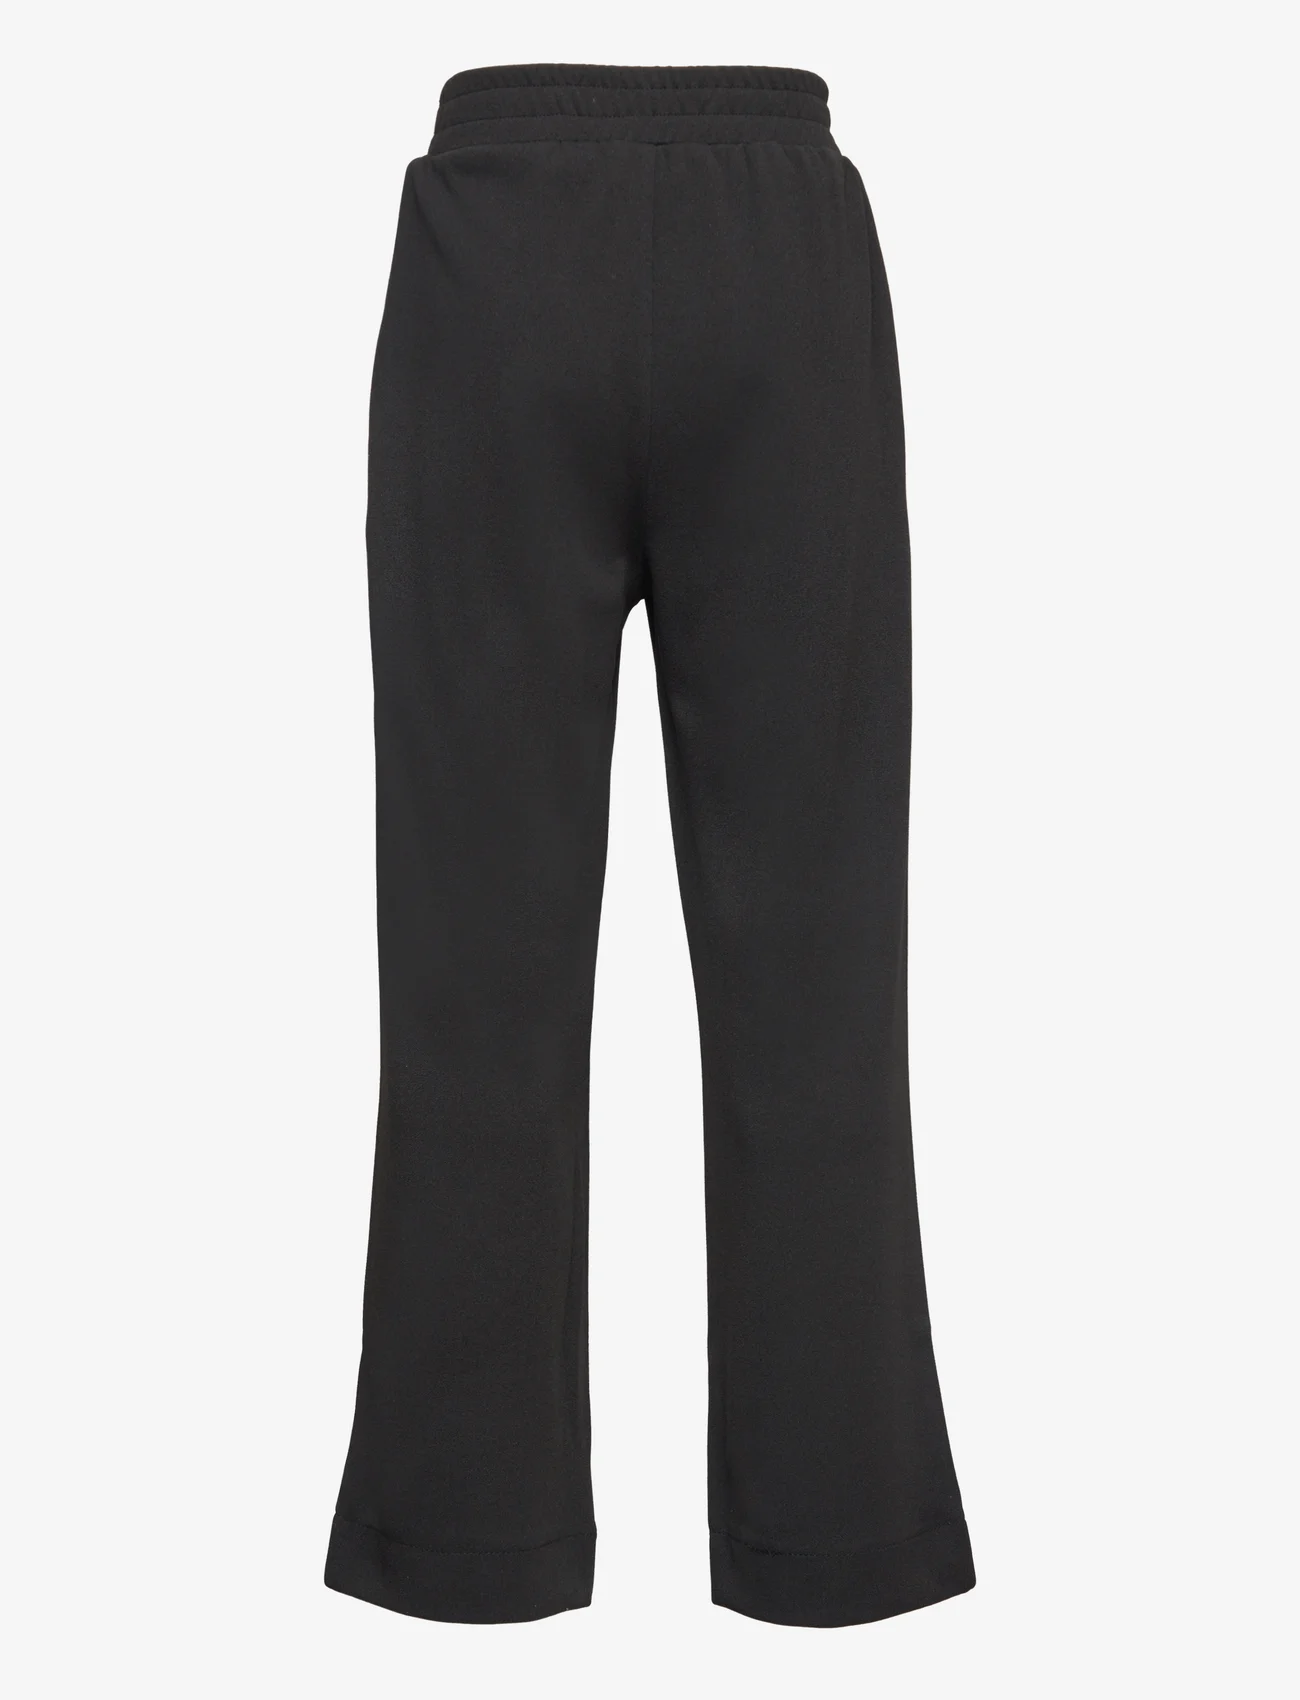 Sofie Schnoor Young - Trousers - black - 1